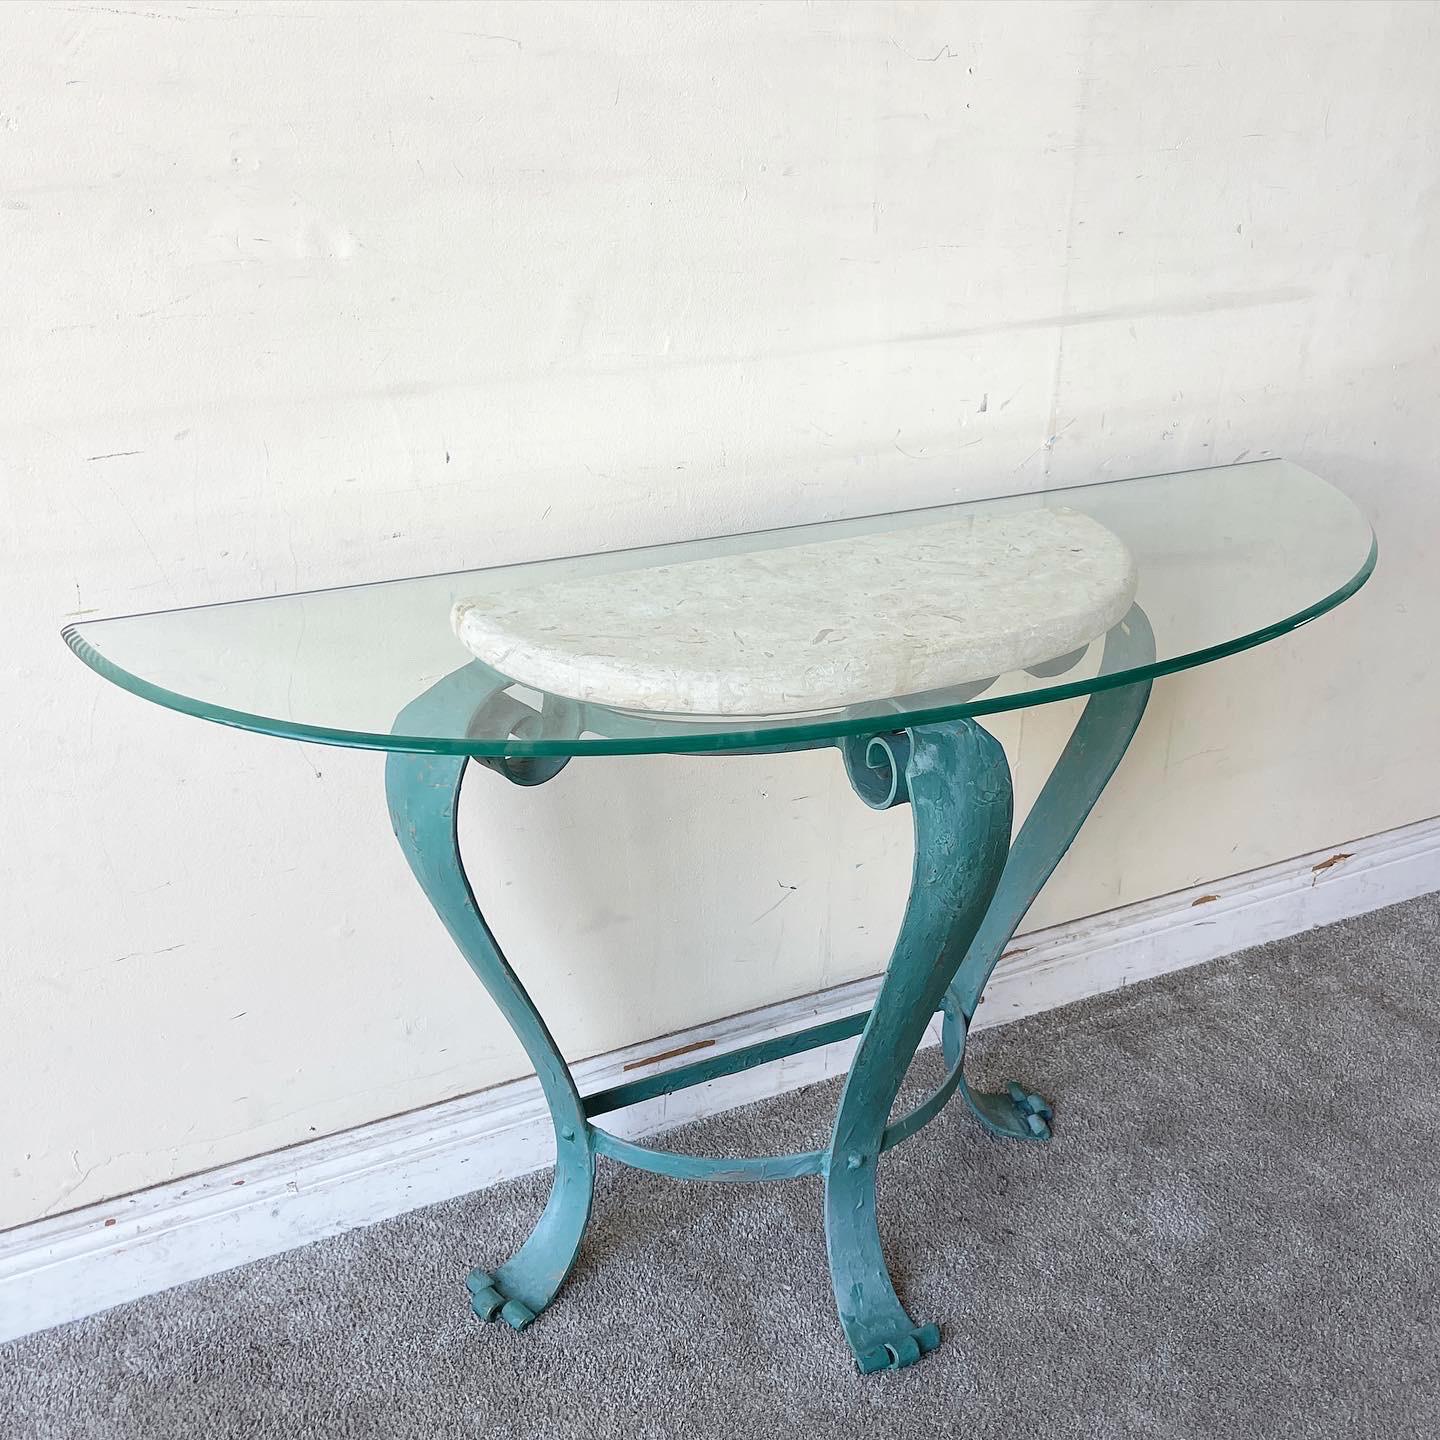 Incredible postmodern/traditional metal Demi lune console table with a beveled glass top. Feature a green finished metal frame with a tessellated stone top.